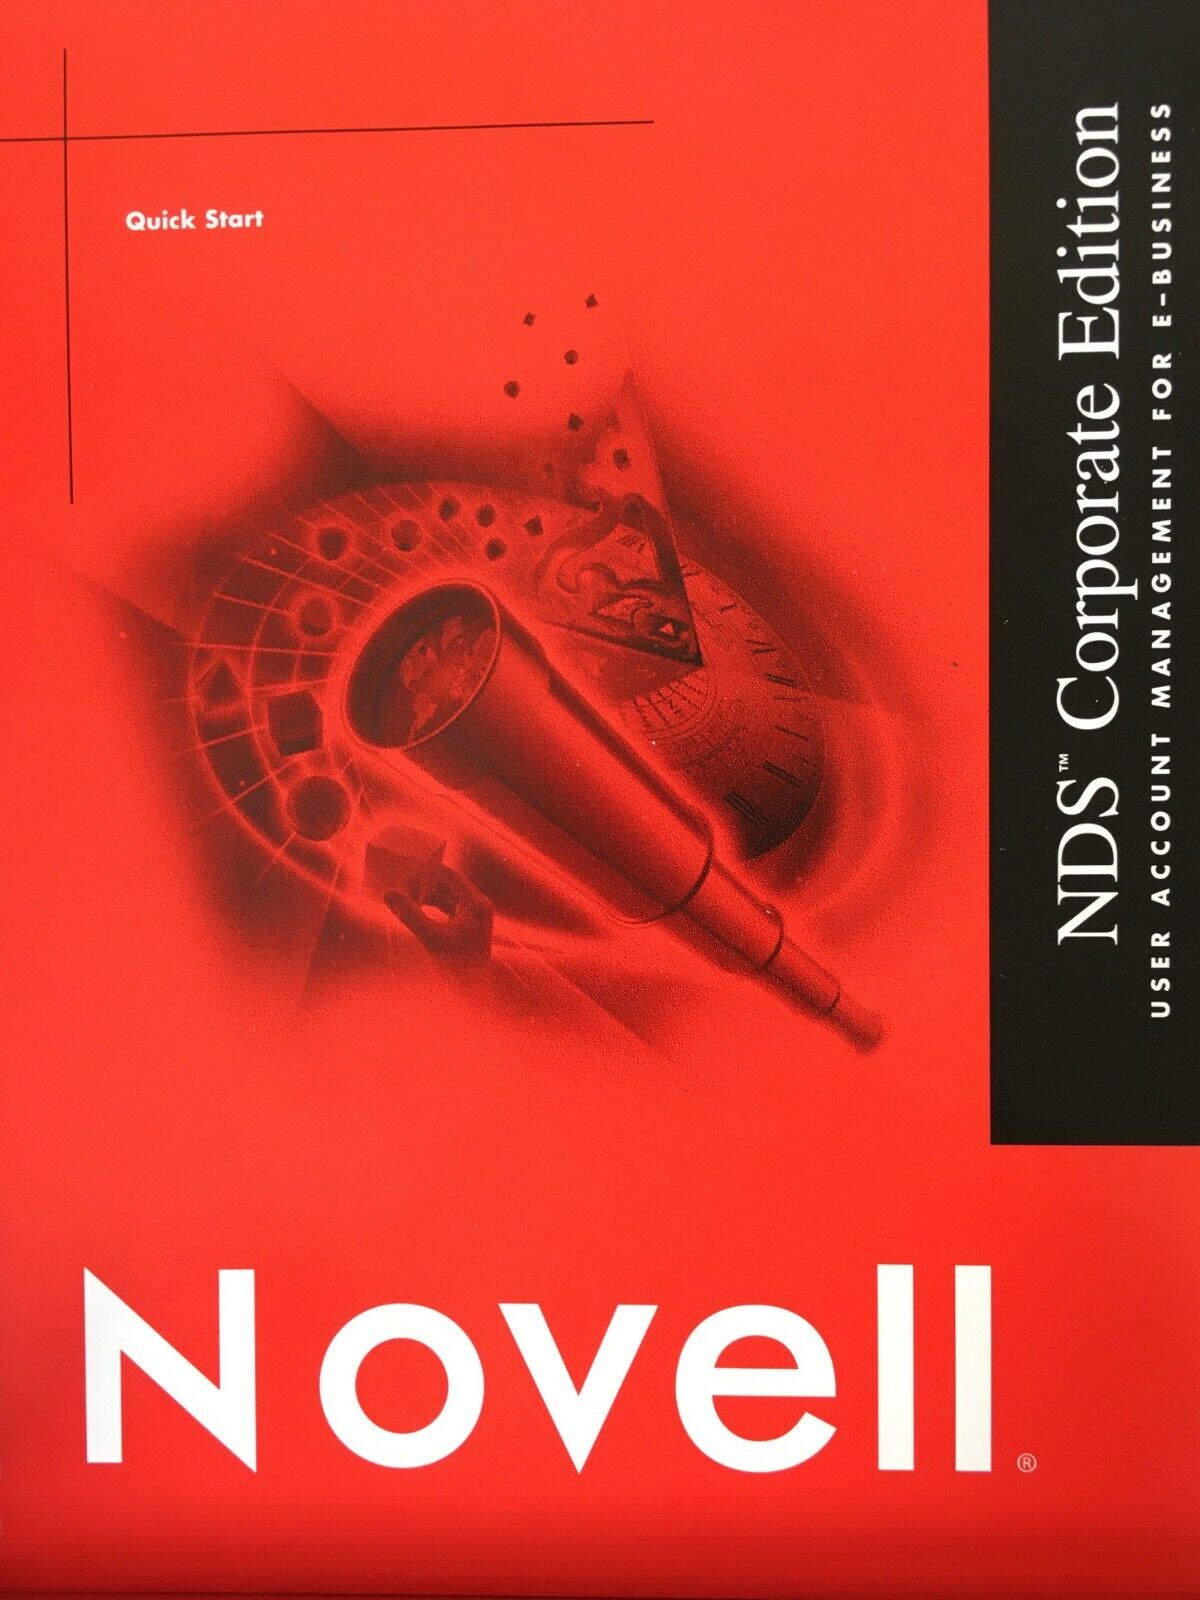 Novell NDS Corporate Edition complete - CDs, book + 25 user license